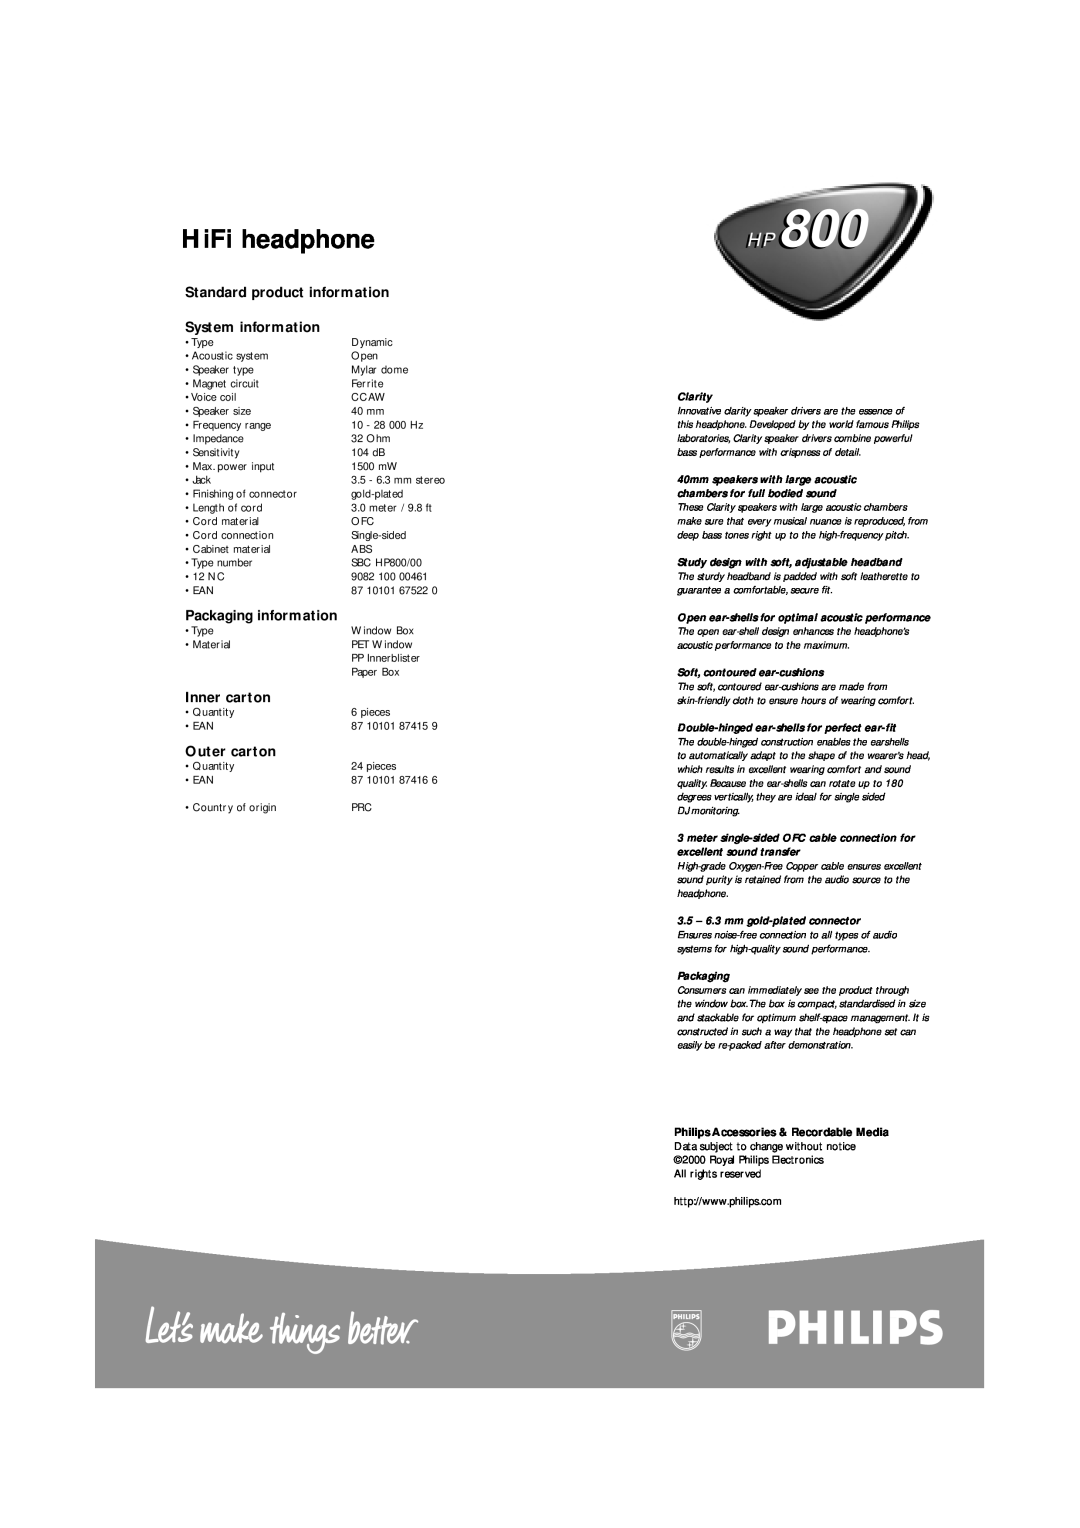 Philips HP800 manual HiFi headphone, Standard product information System information, Packaging information, Inner carton 